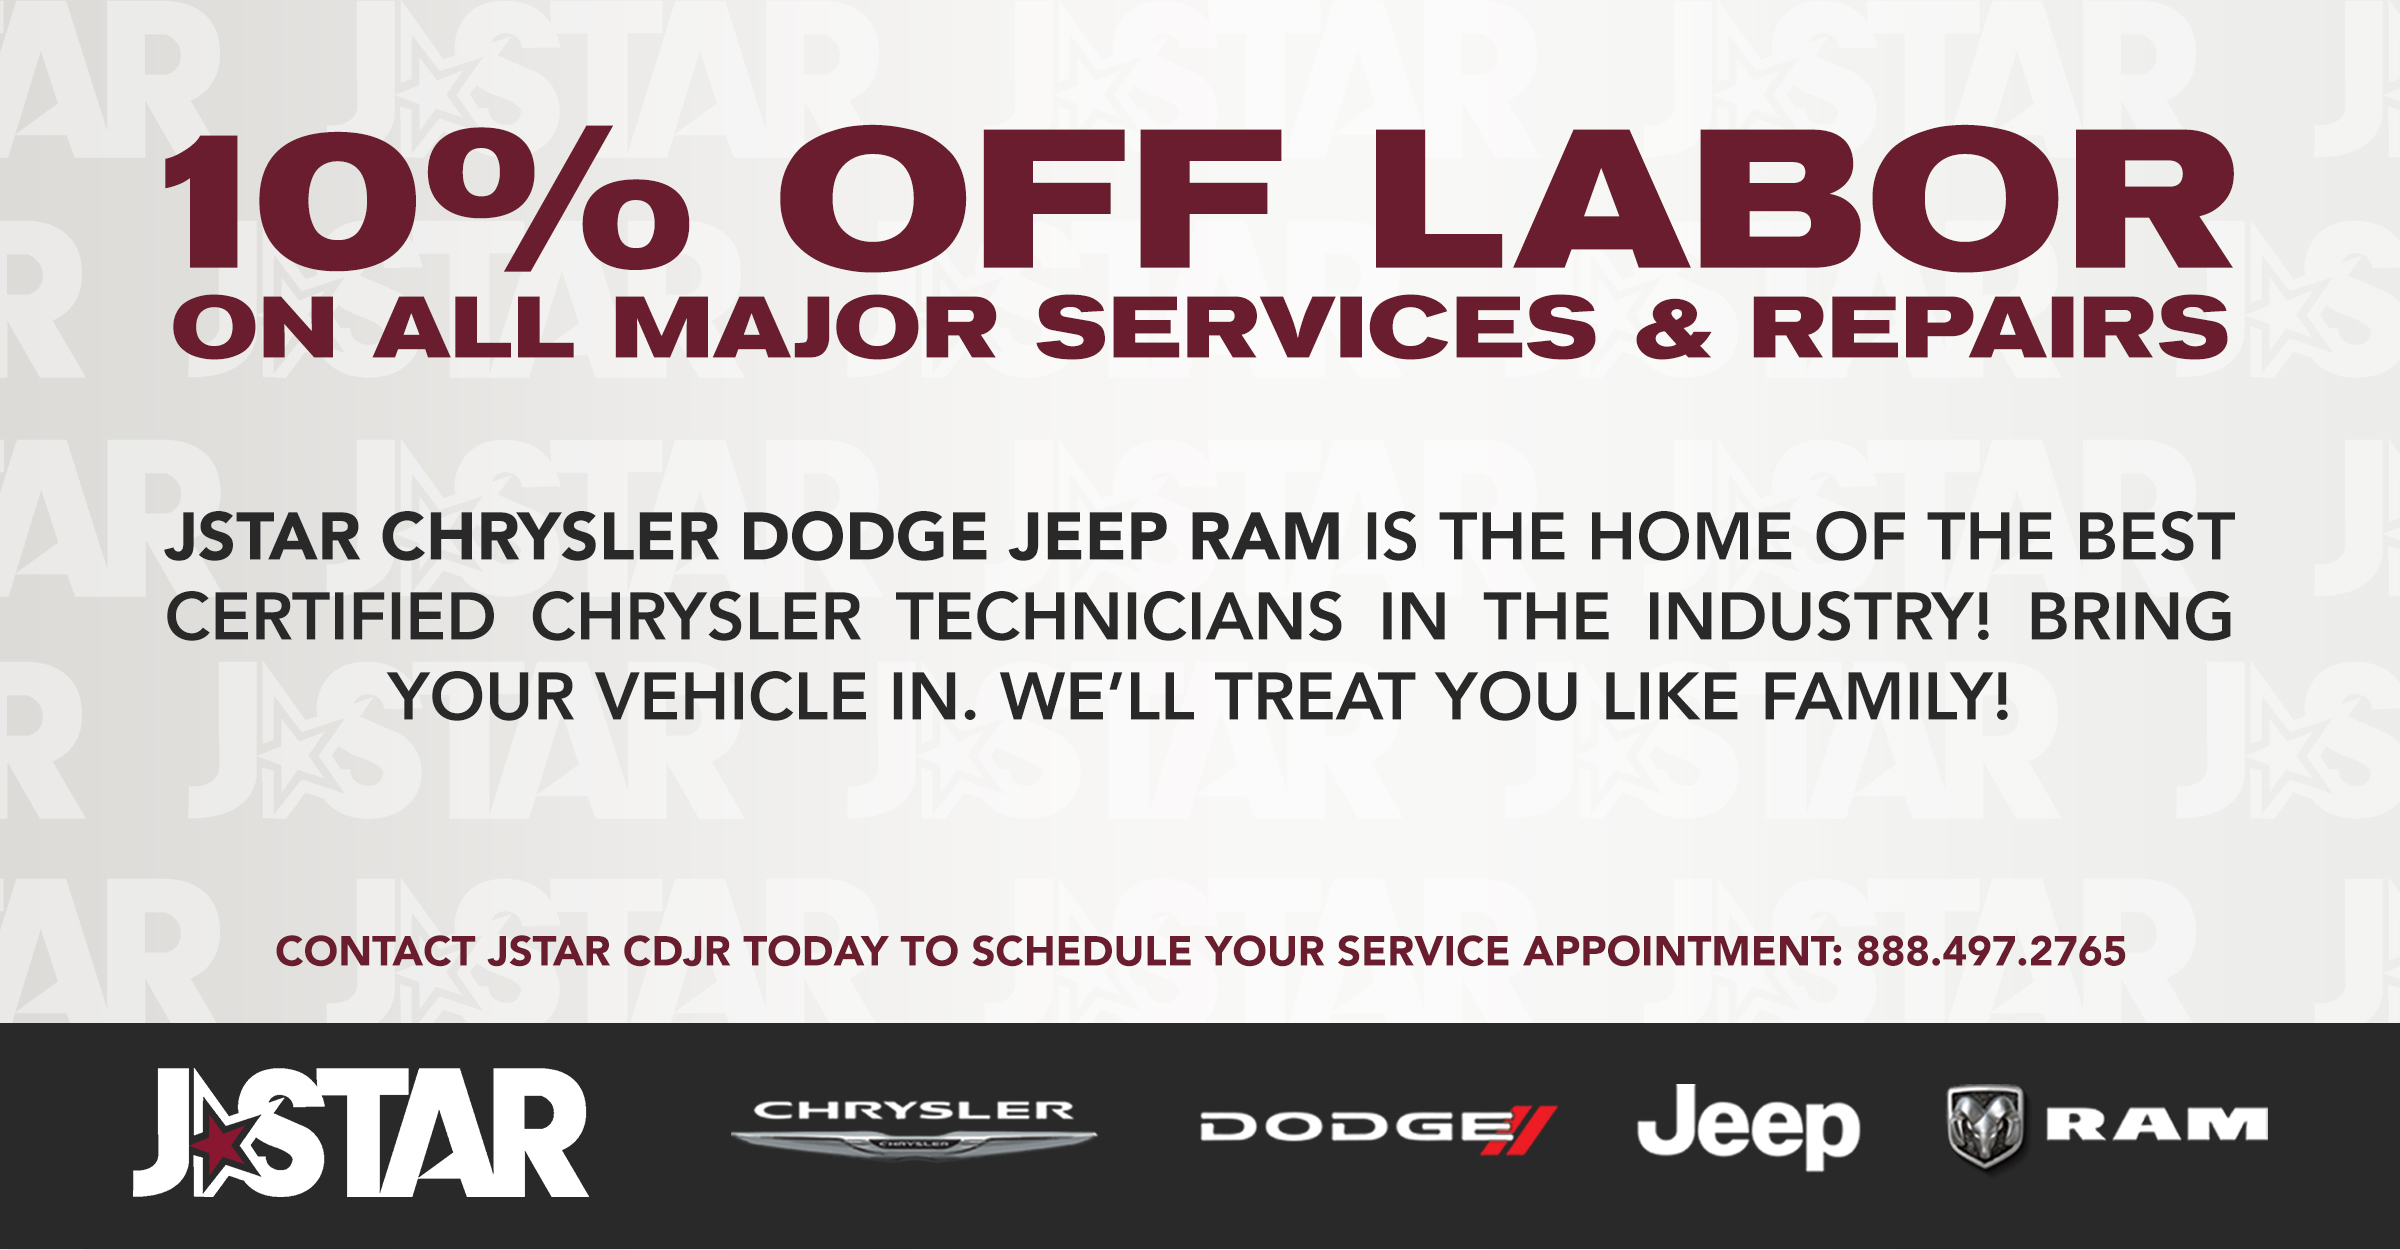 10% OFF ON ALL MAJOR SERVICES & REPAIRS